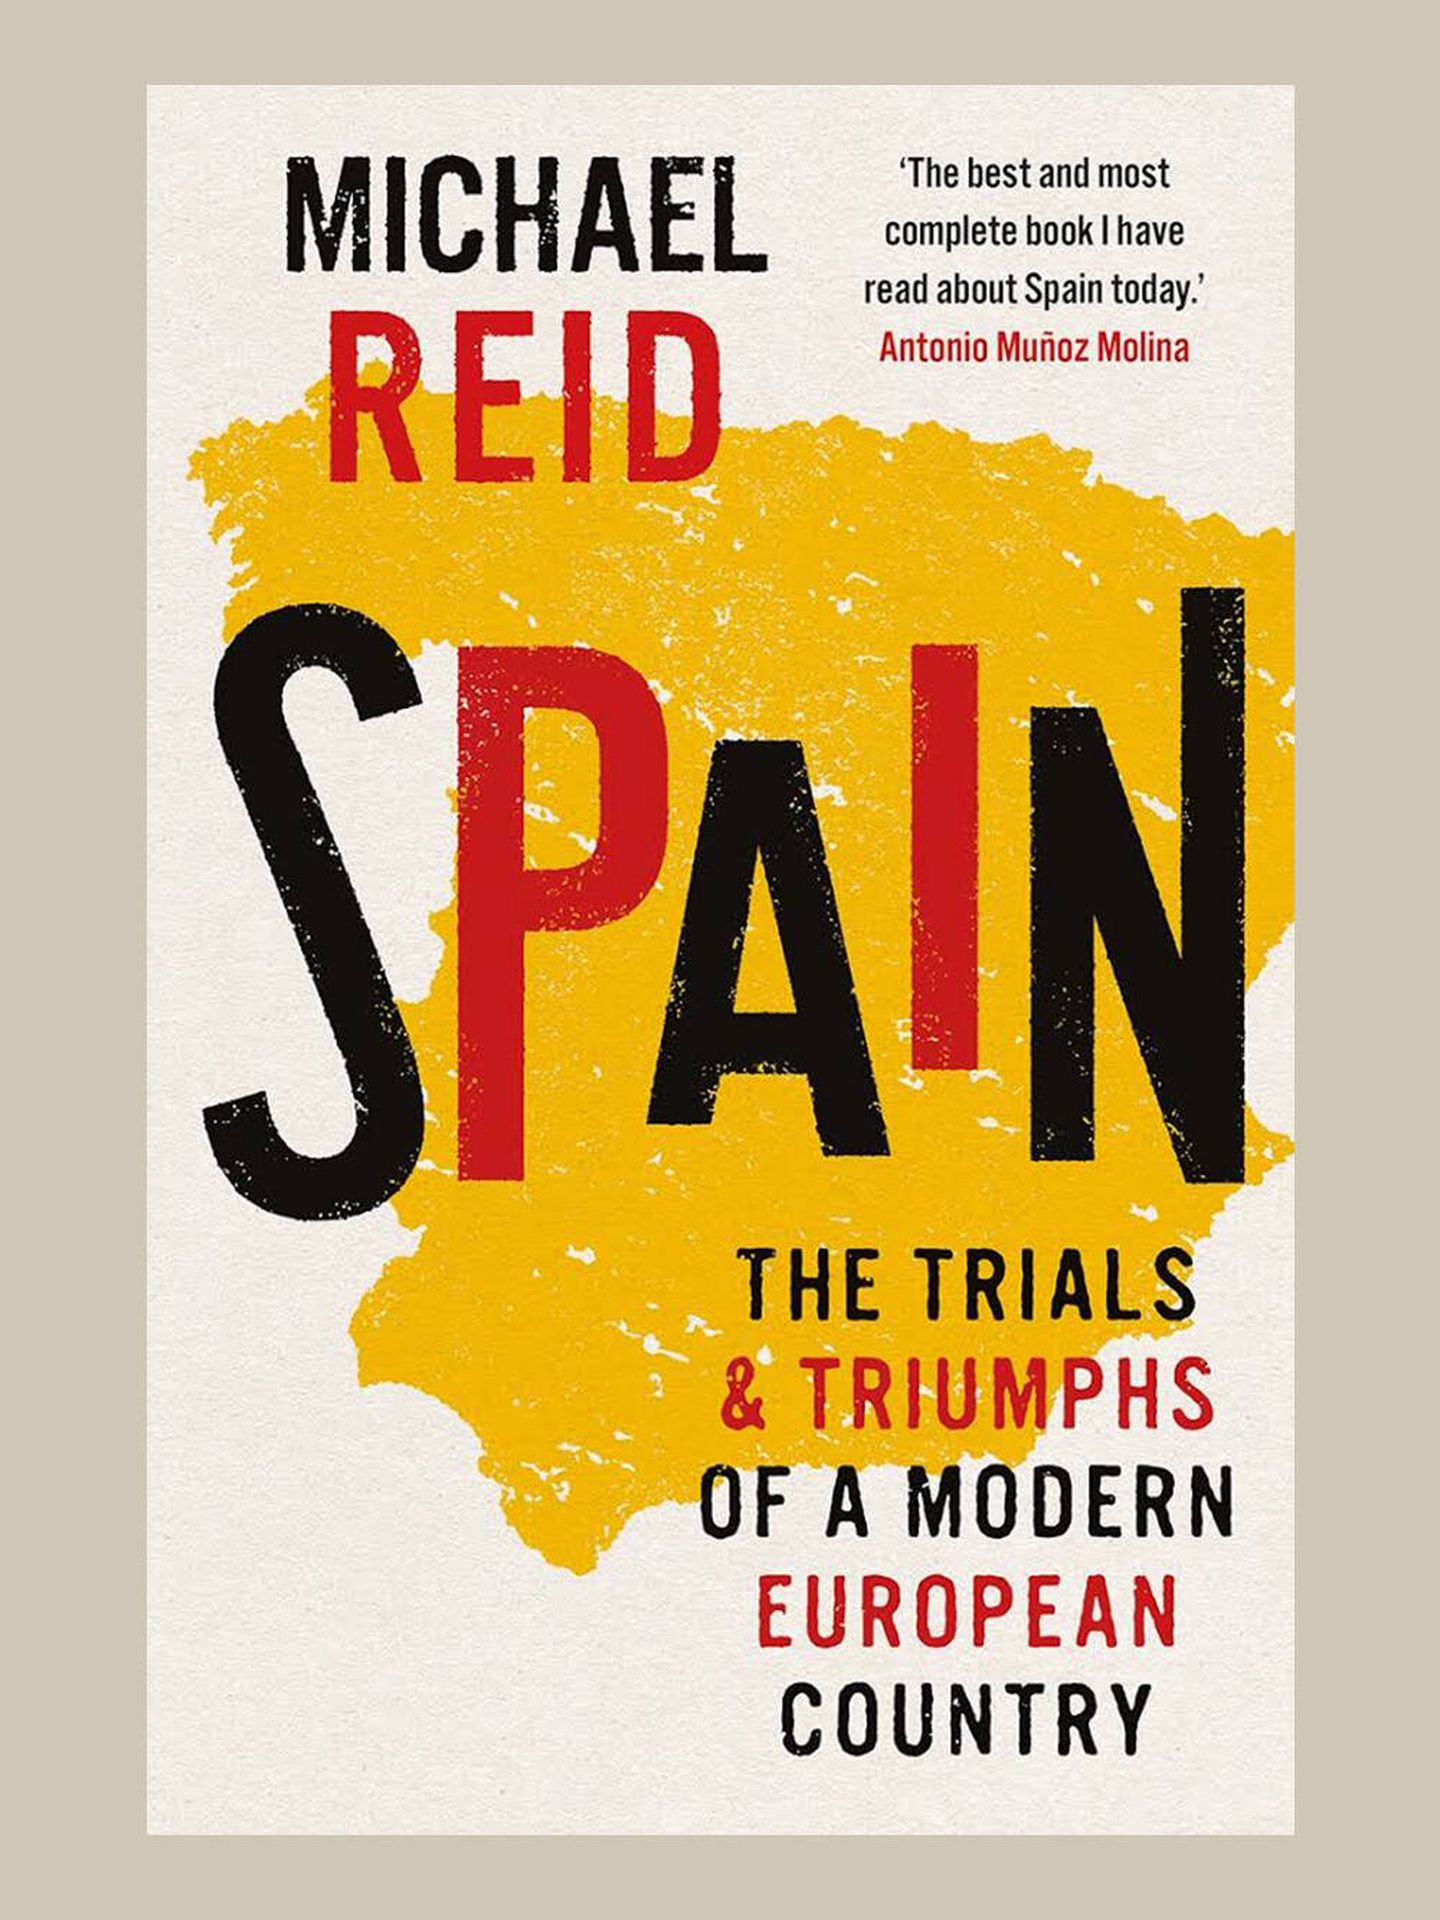 The Trials and Triumphs of a Modern European Country de Michael Red.